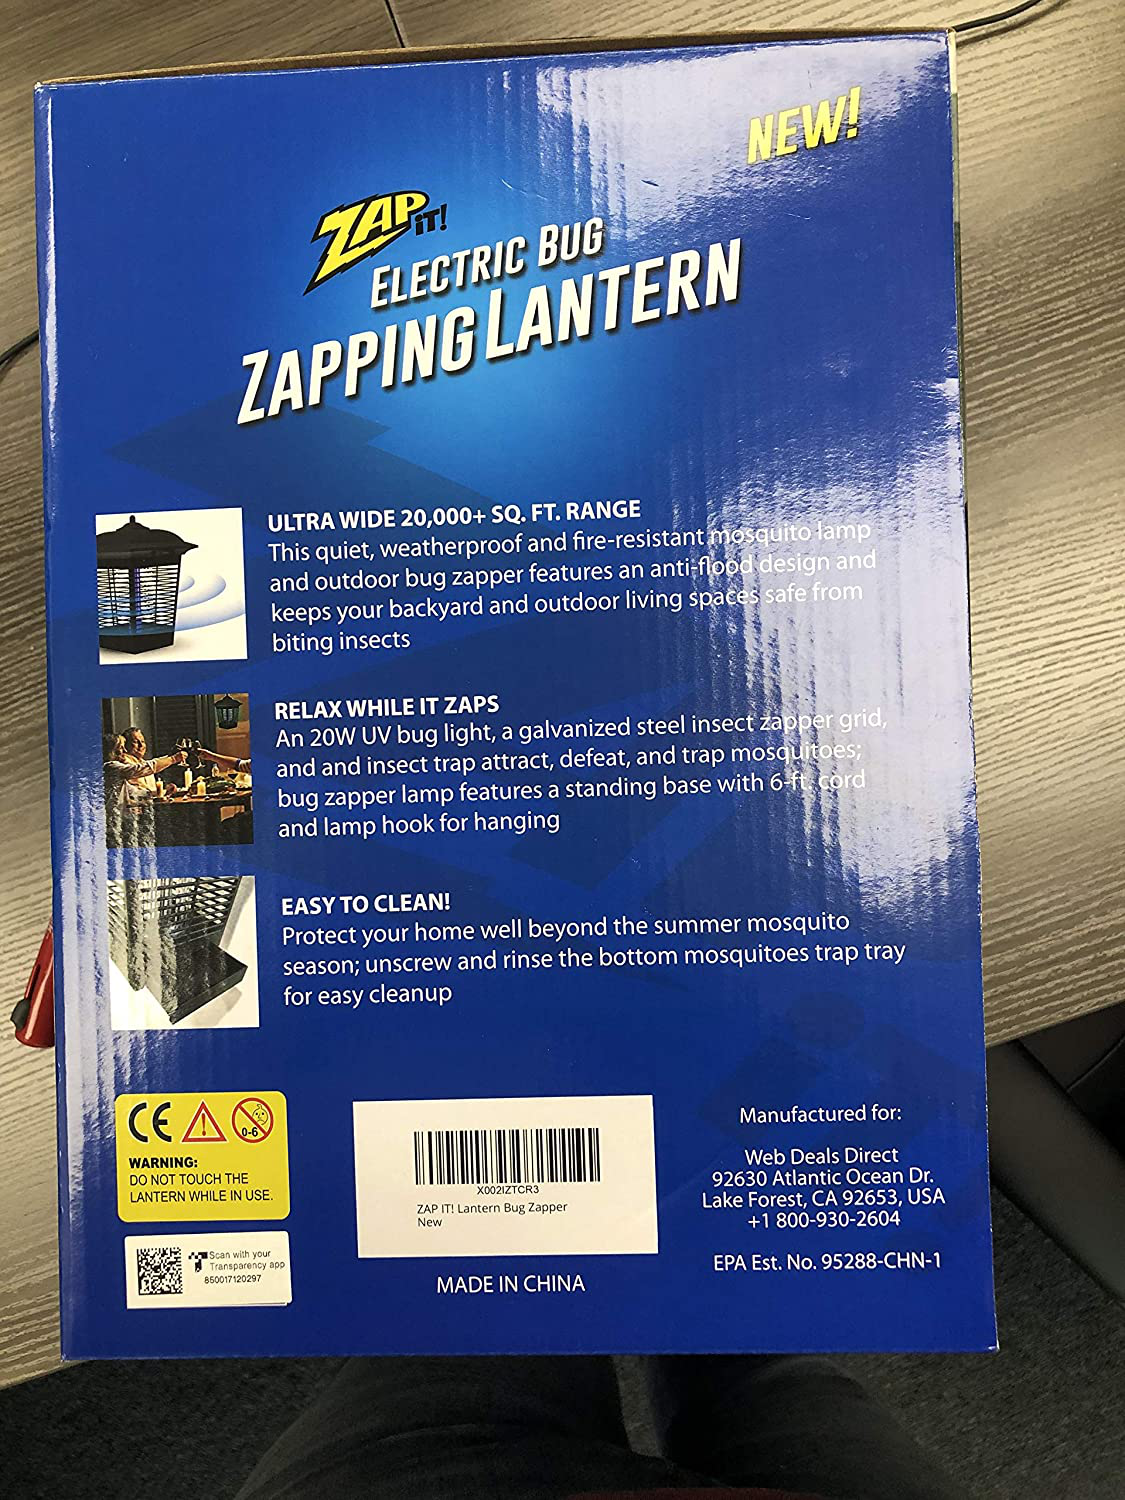 ZAP IT! Electric Indoor/Outdoor Bug Zapper (3,000 Volt) Waterproof 360 Degree Mosquito, Bug, and Insect Killer - Non-Toxic Attractant UV Light and Electric Shock - Bug Collector to Easily Clean